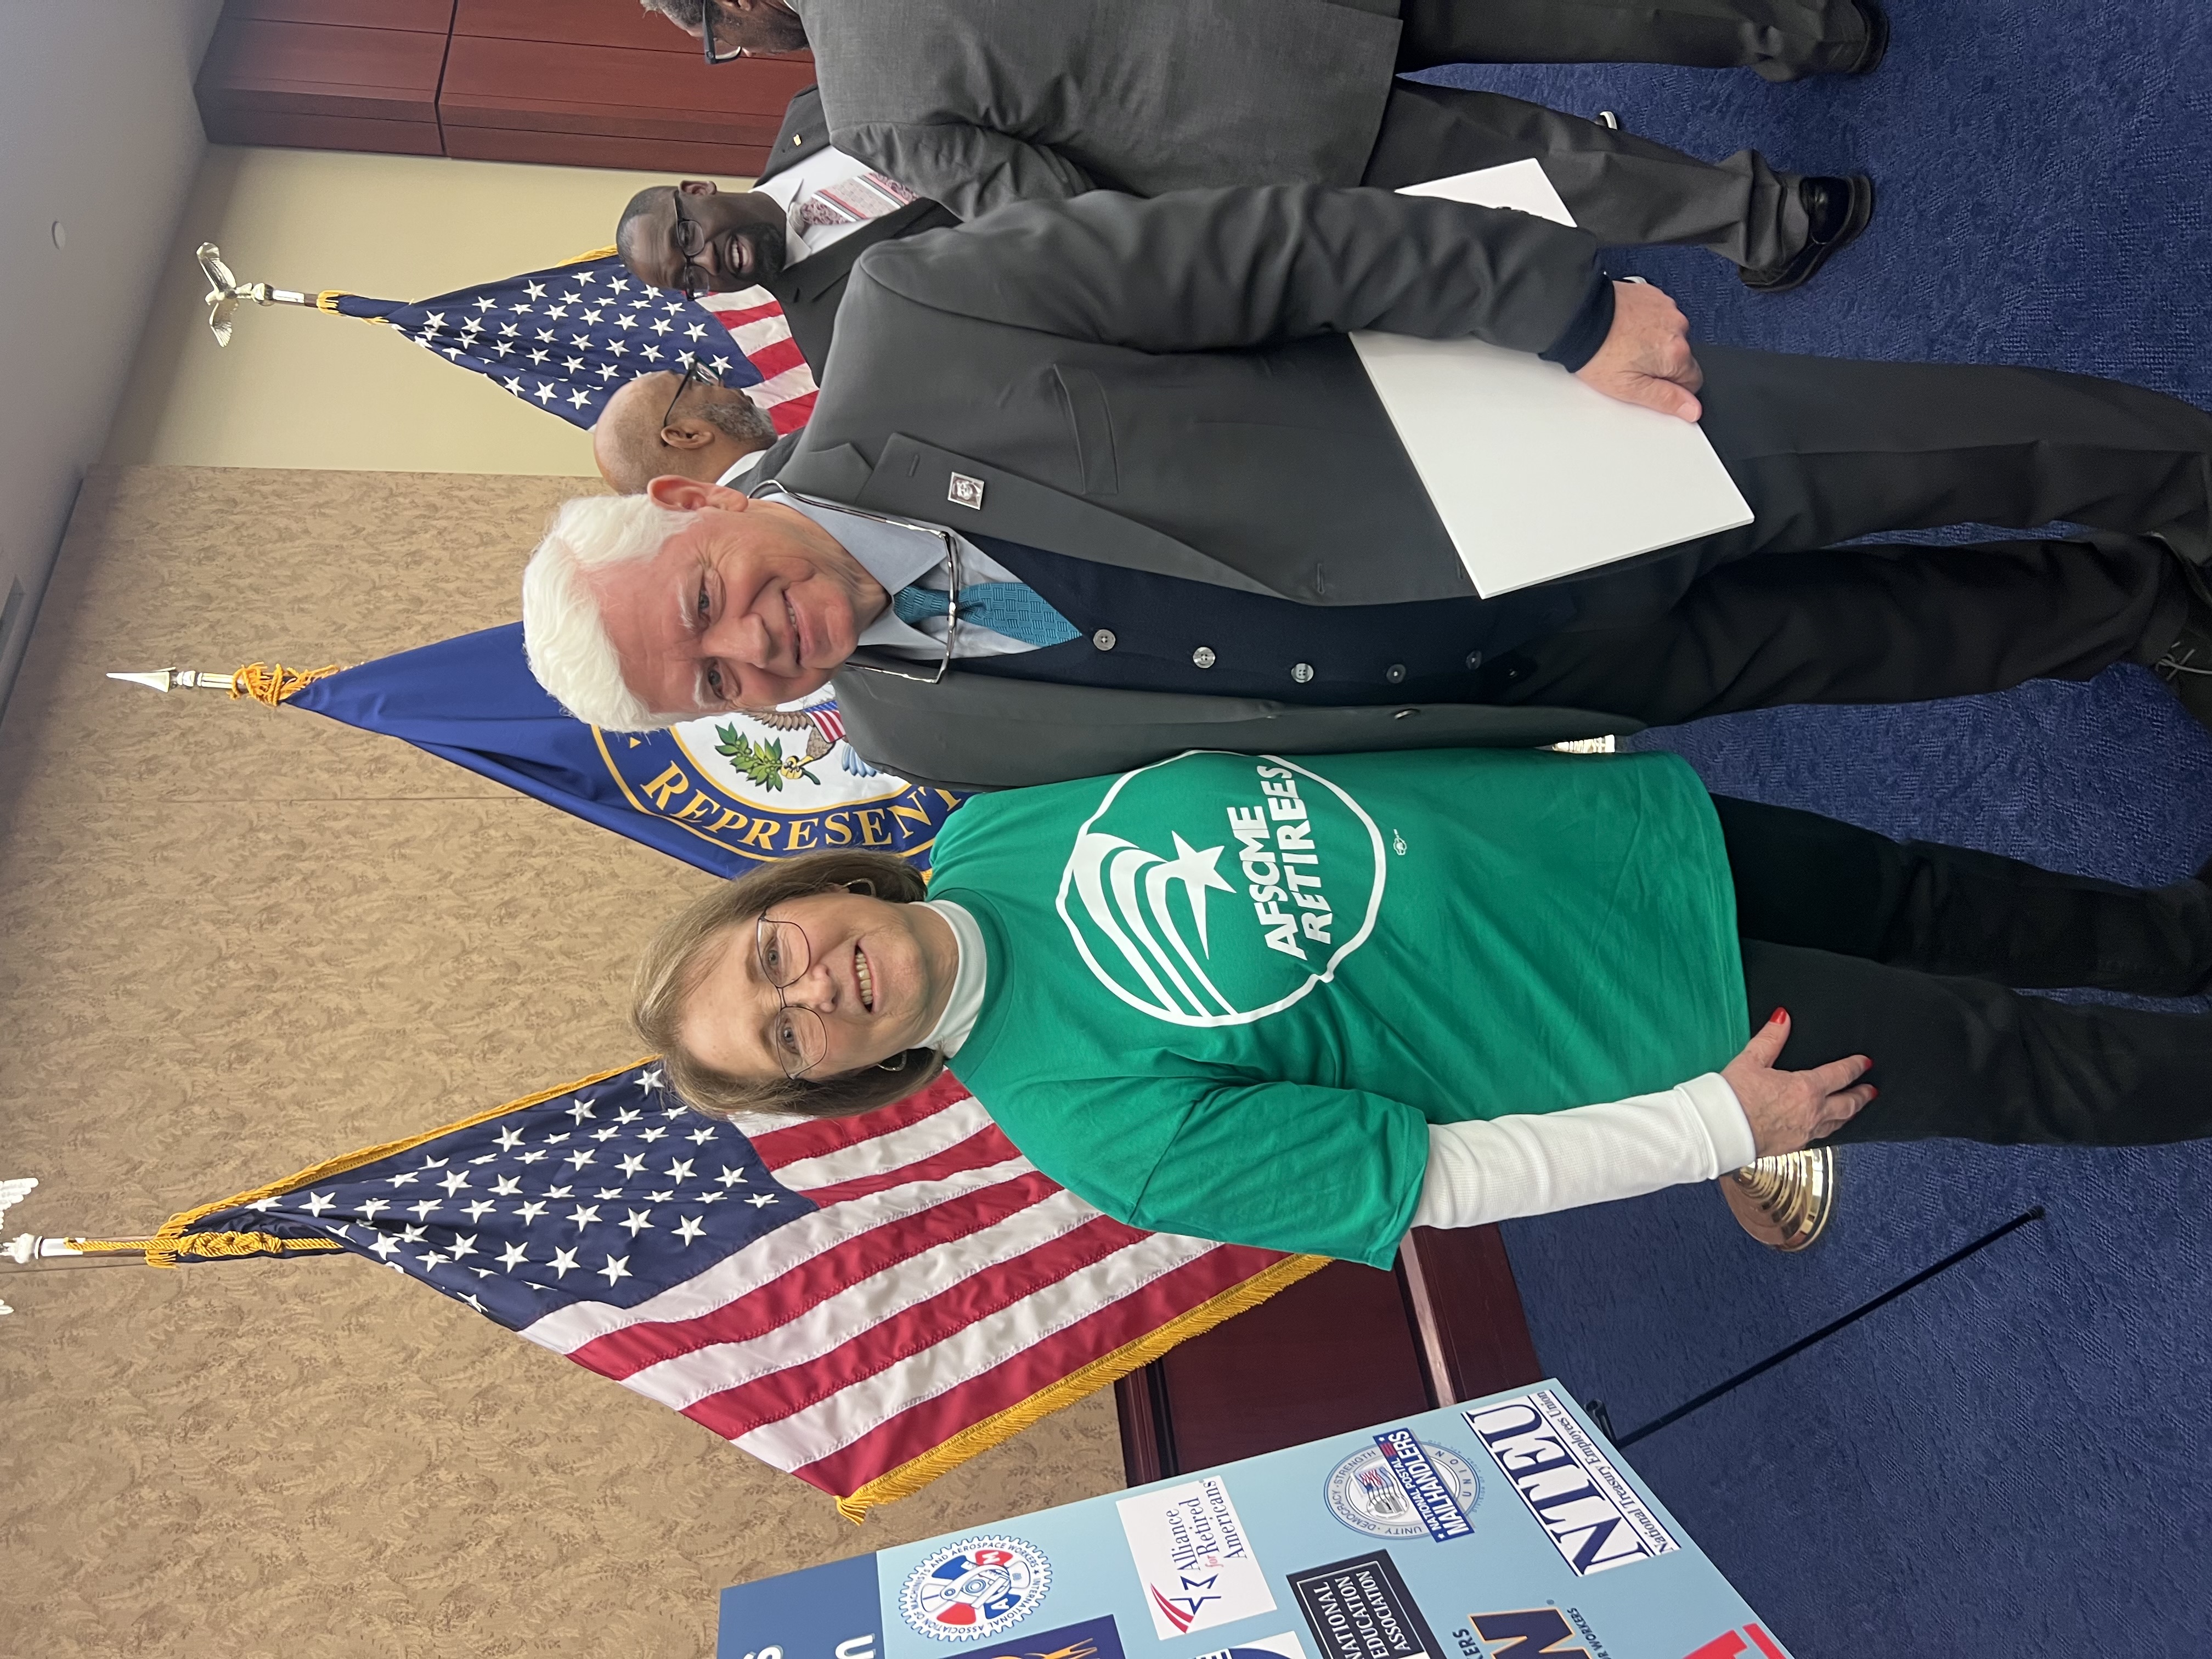 AFSCME retiree blasts fiscal commission bill as a backdoor way to gut Social Security, Medicare 